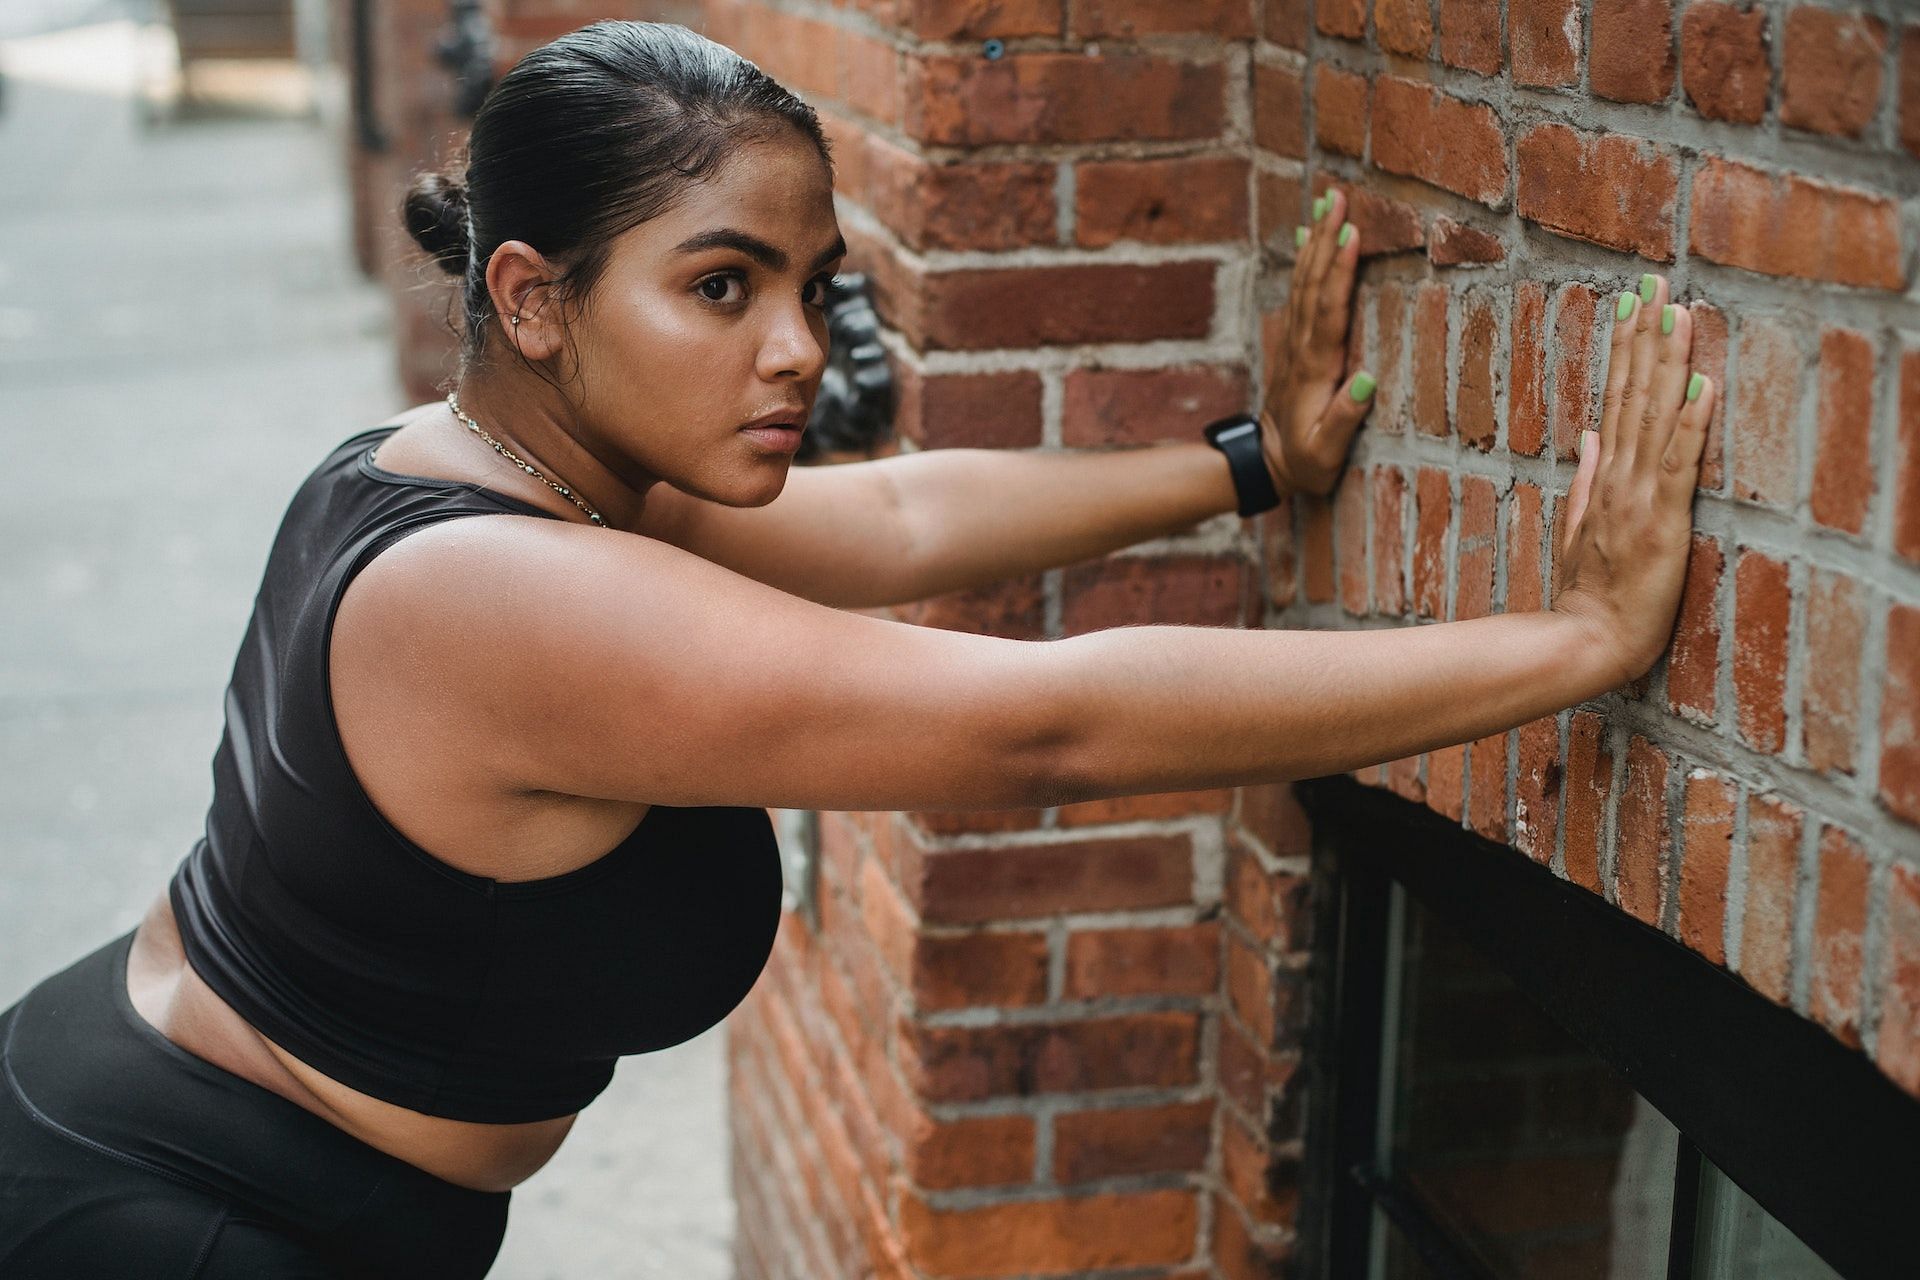 Wall ab workouts are one of the easiest ways to start with core training. (Photo via Pexels/Ketut Subiyanto)